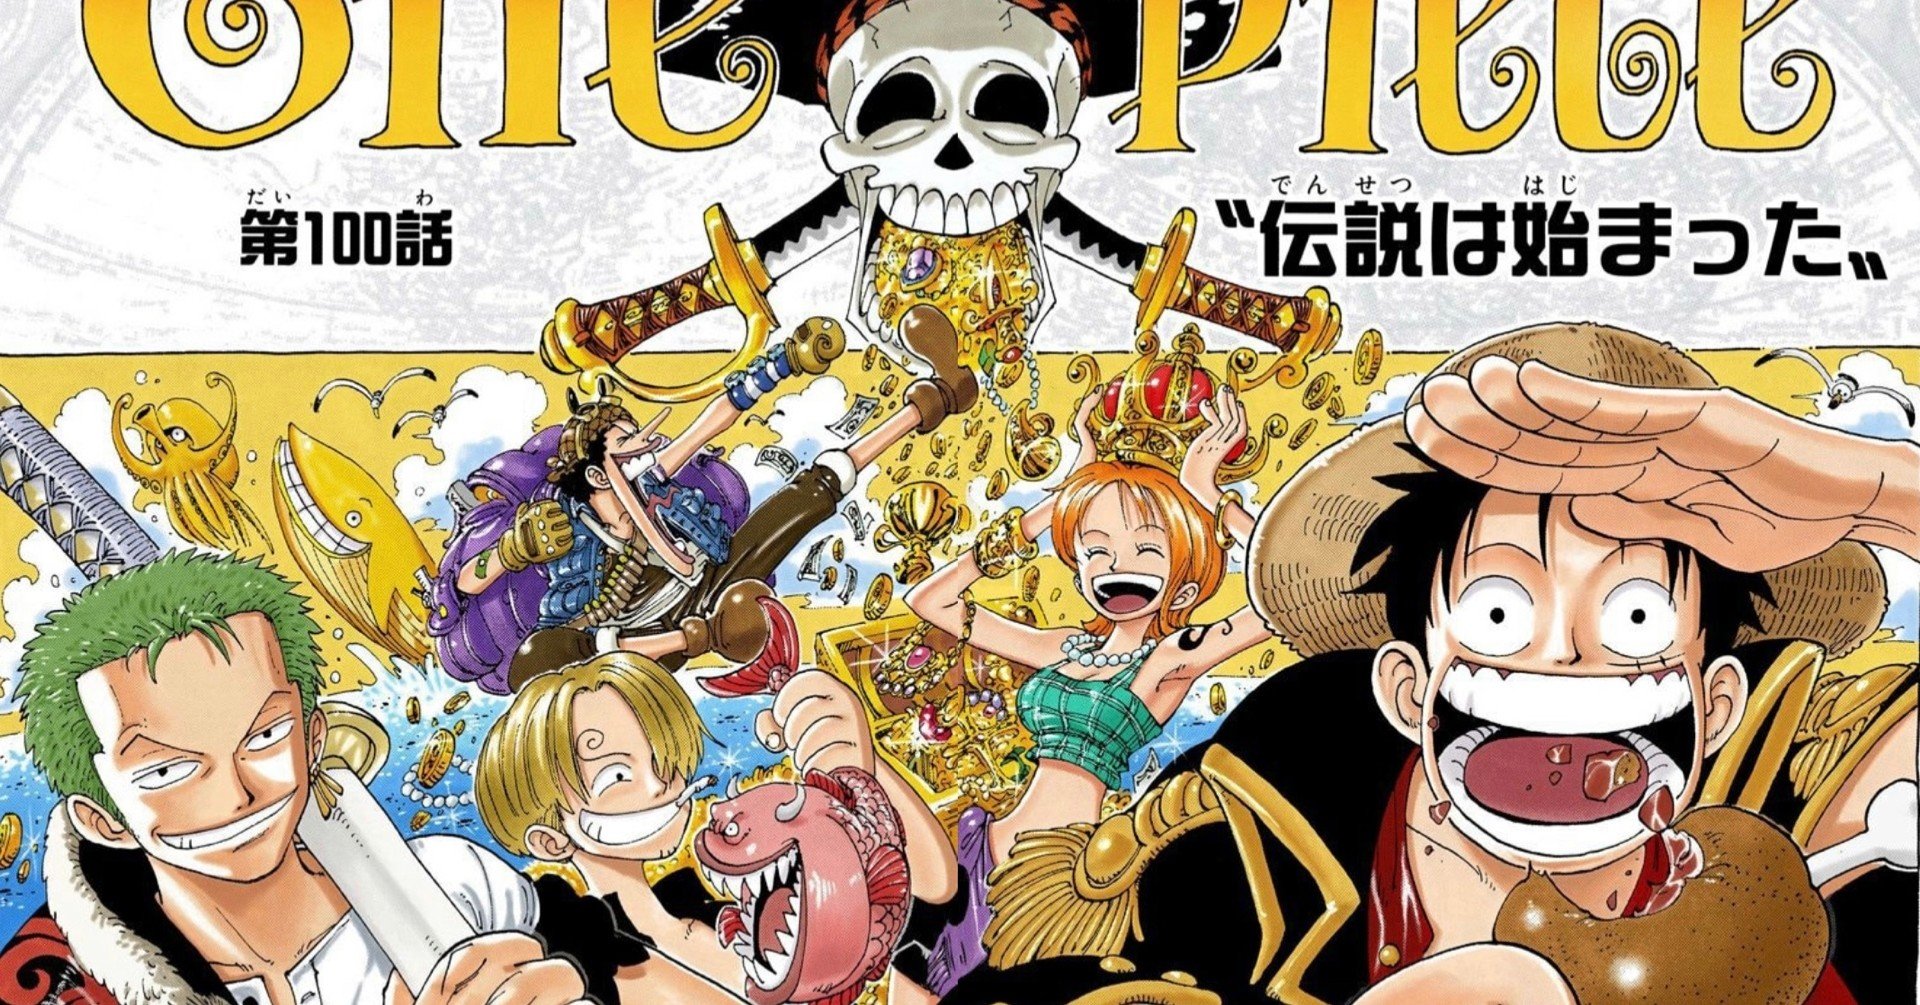 One Piece 考察 記念すべき第1000話の内容を考える One Piece学 研究家 山野 礁太 Note